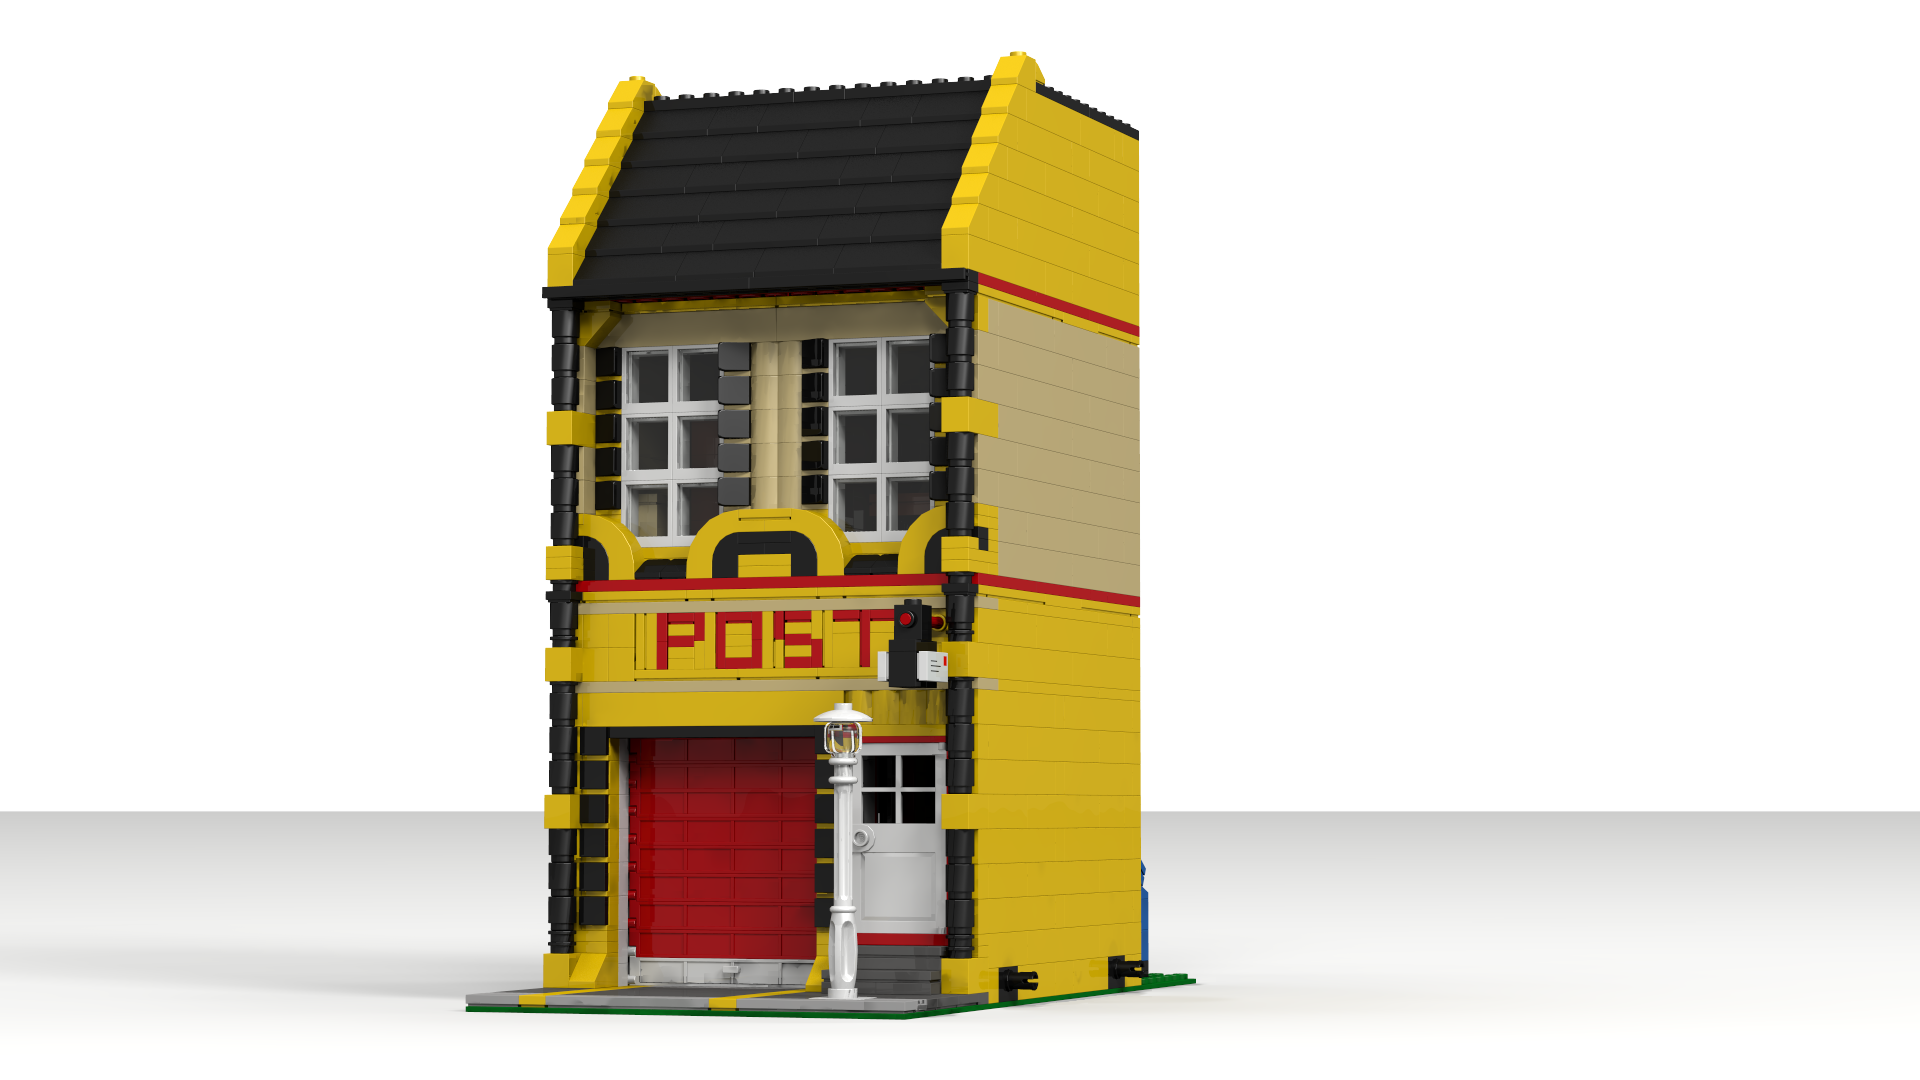 Modular Post Office 3.png - Post Office, Transparent background PNG HD thumbnail